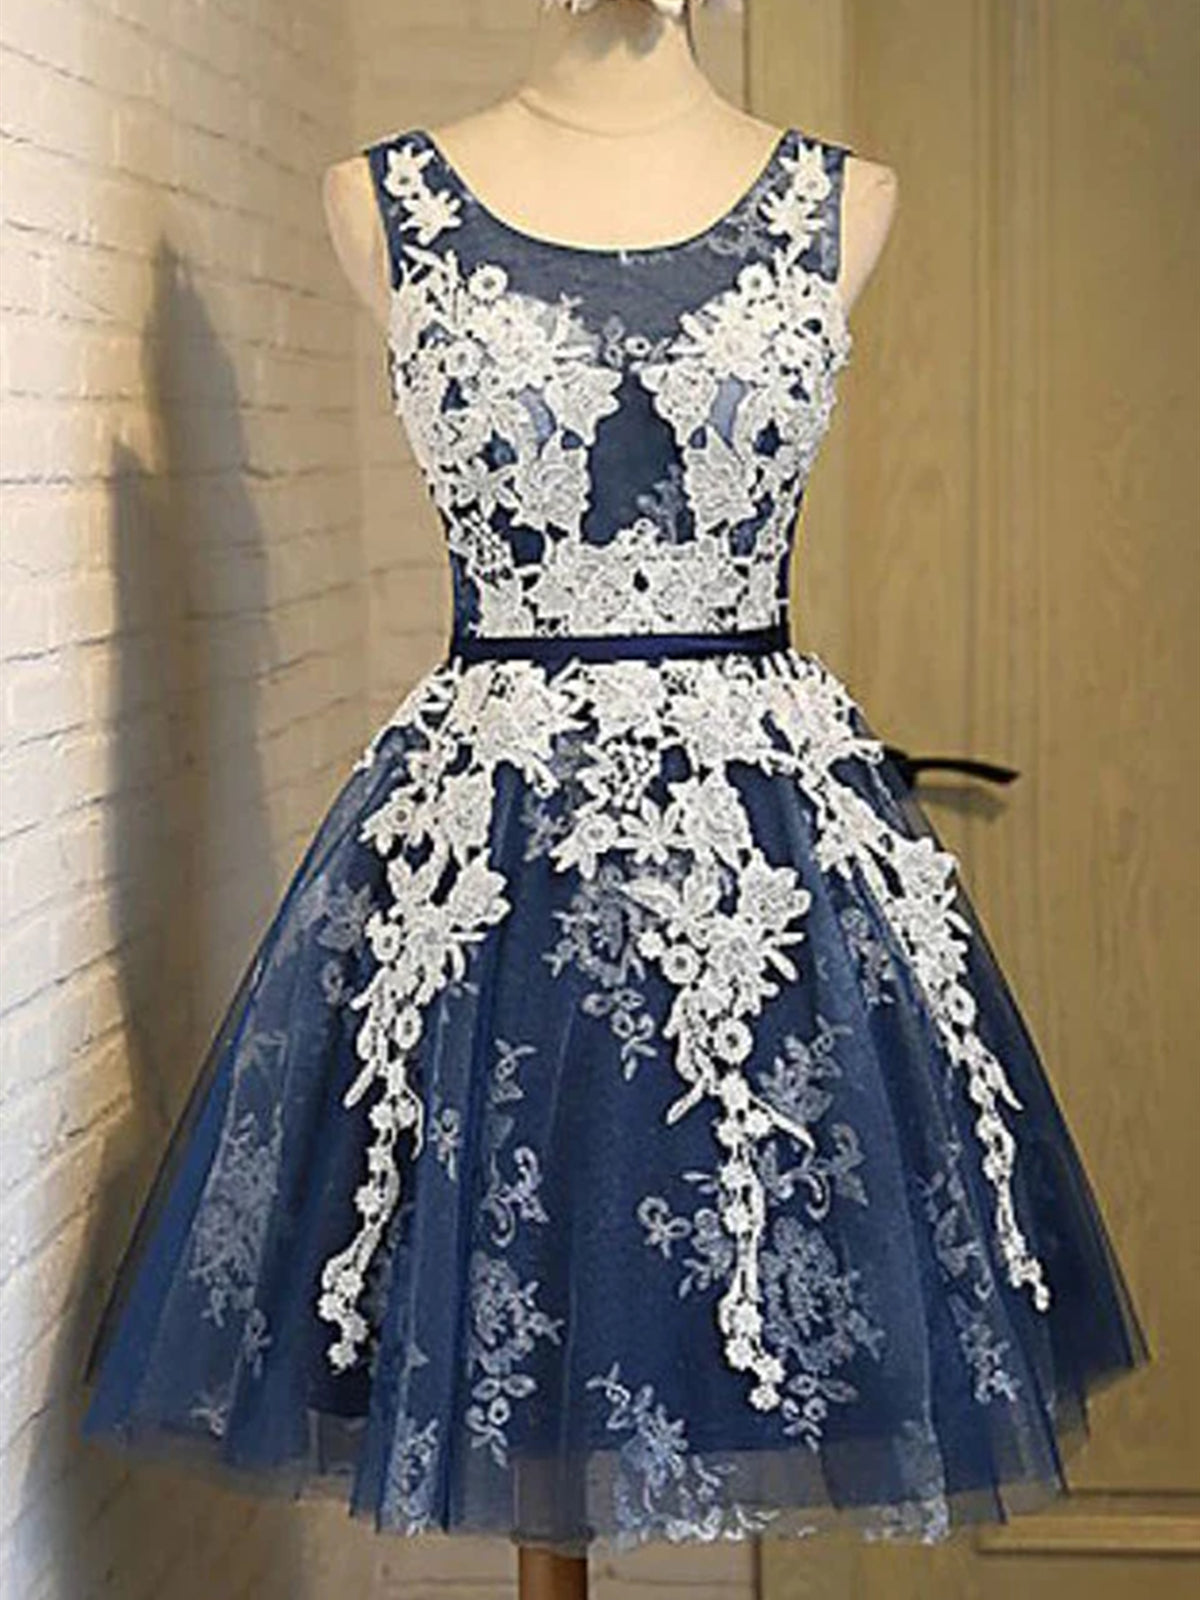 Party Dress For Baby, Short Dark Navy Blue Prom Dress with White Lace, Short Dark Navy Blue Graduation Homecoming Dresses